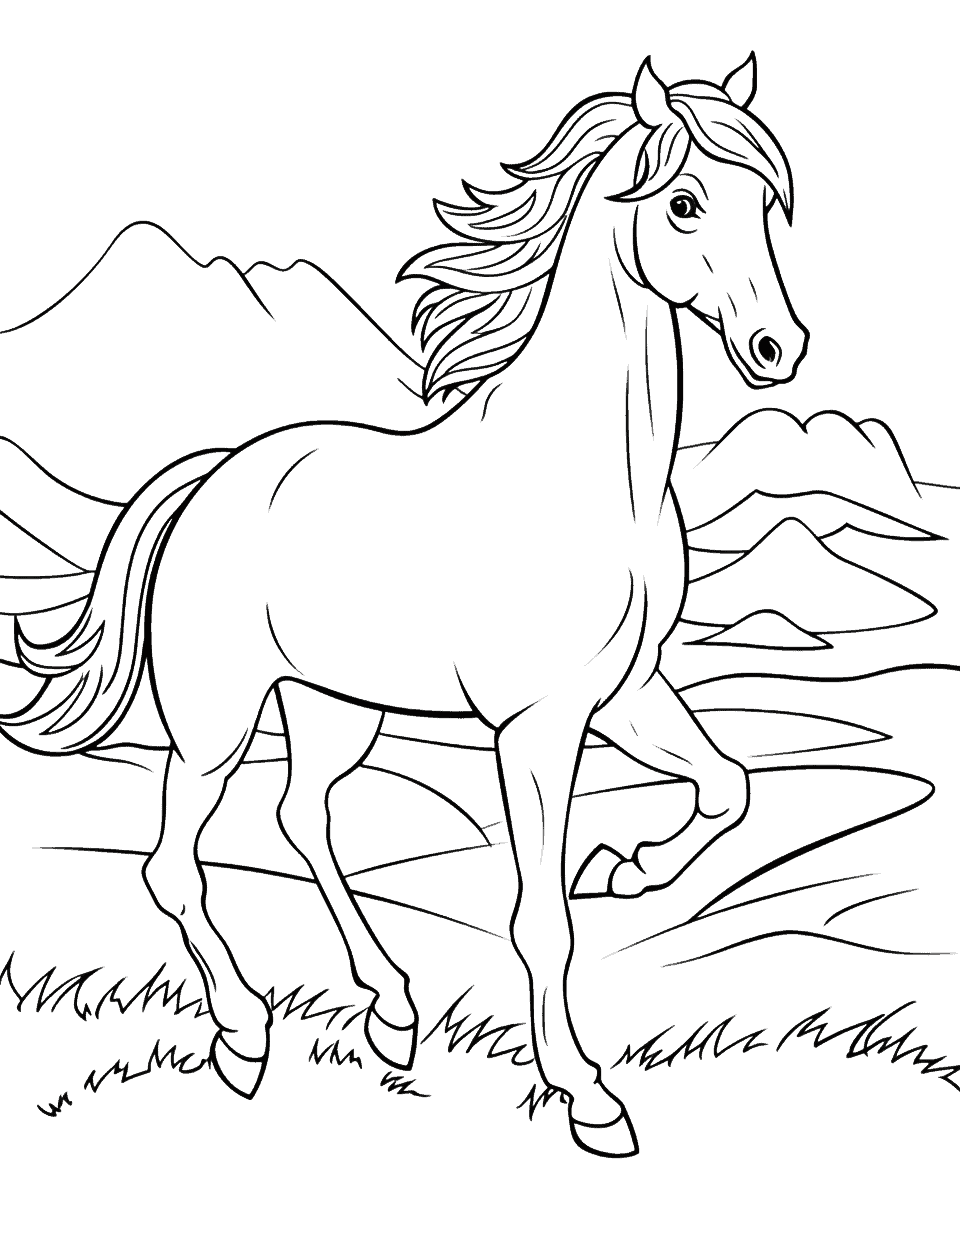 Wild Horse Freedom Coloring Page - A wild Mustang horse galloping freely across a beautiful landscape.